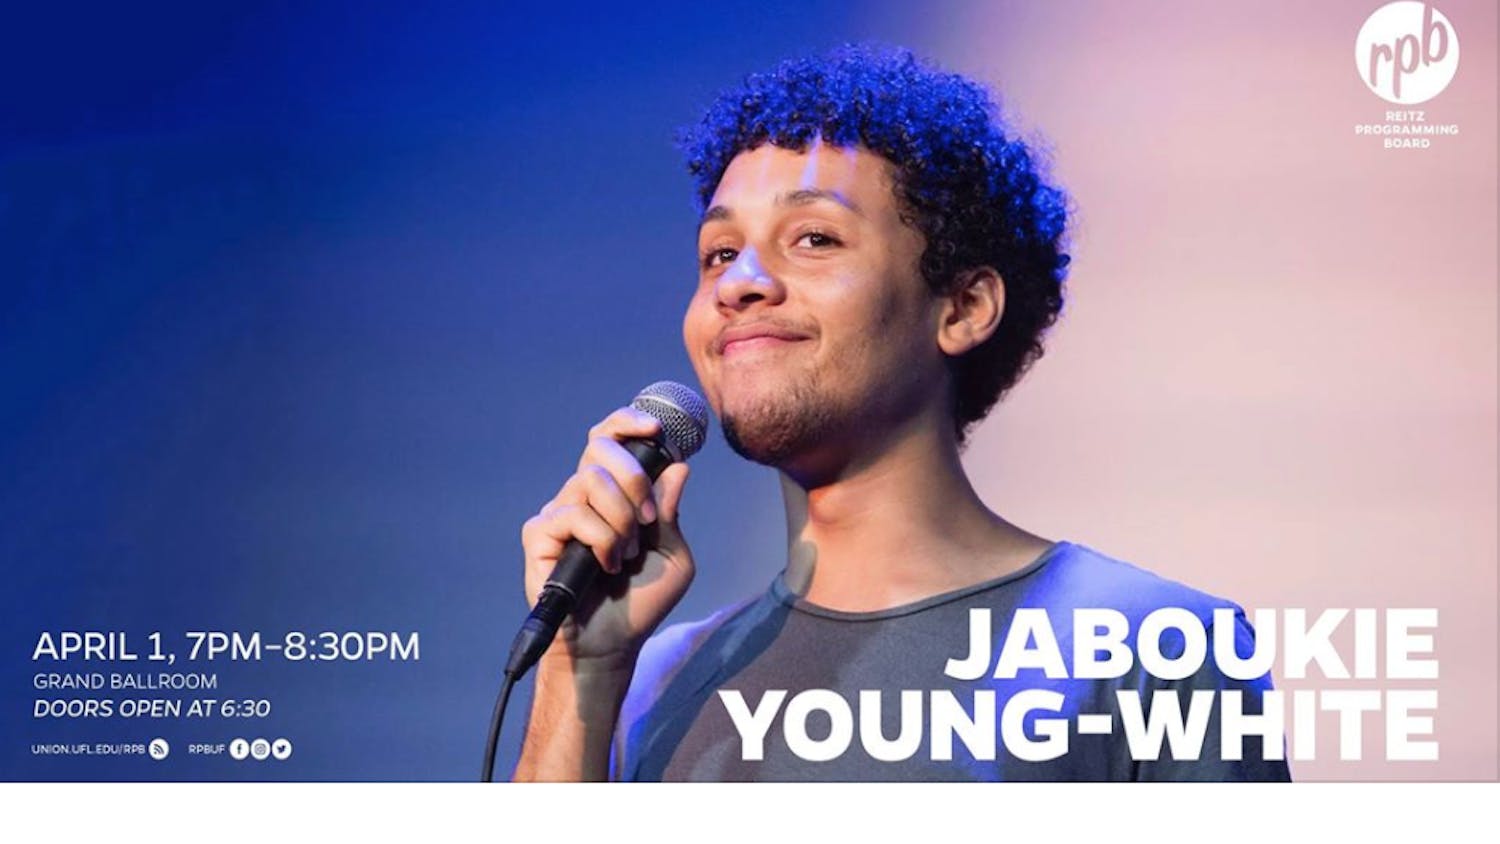 Comedian Jaboukie Young-White will perform a stand up routine at the Reitz Union Grand Ballroom on April 1.